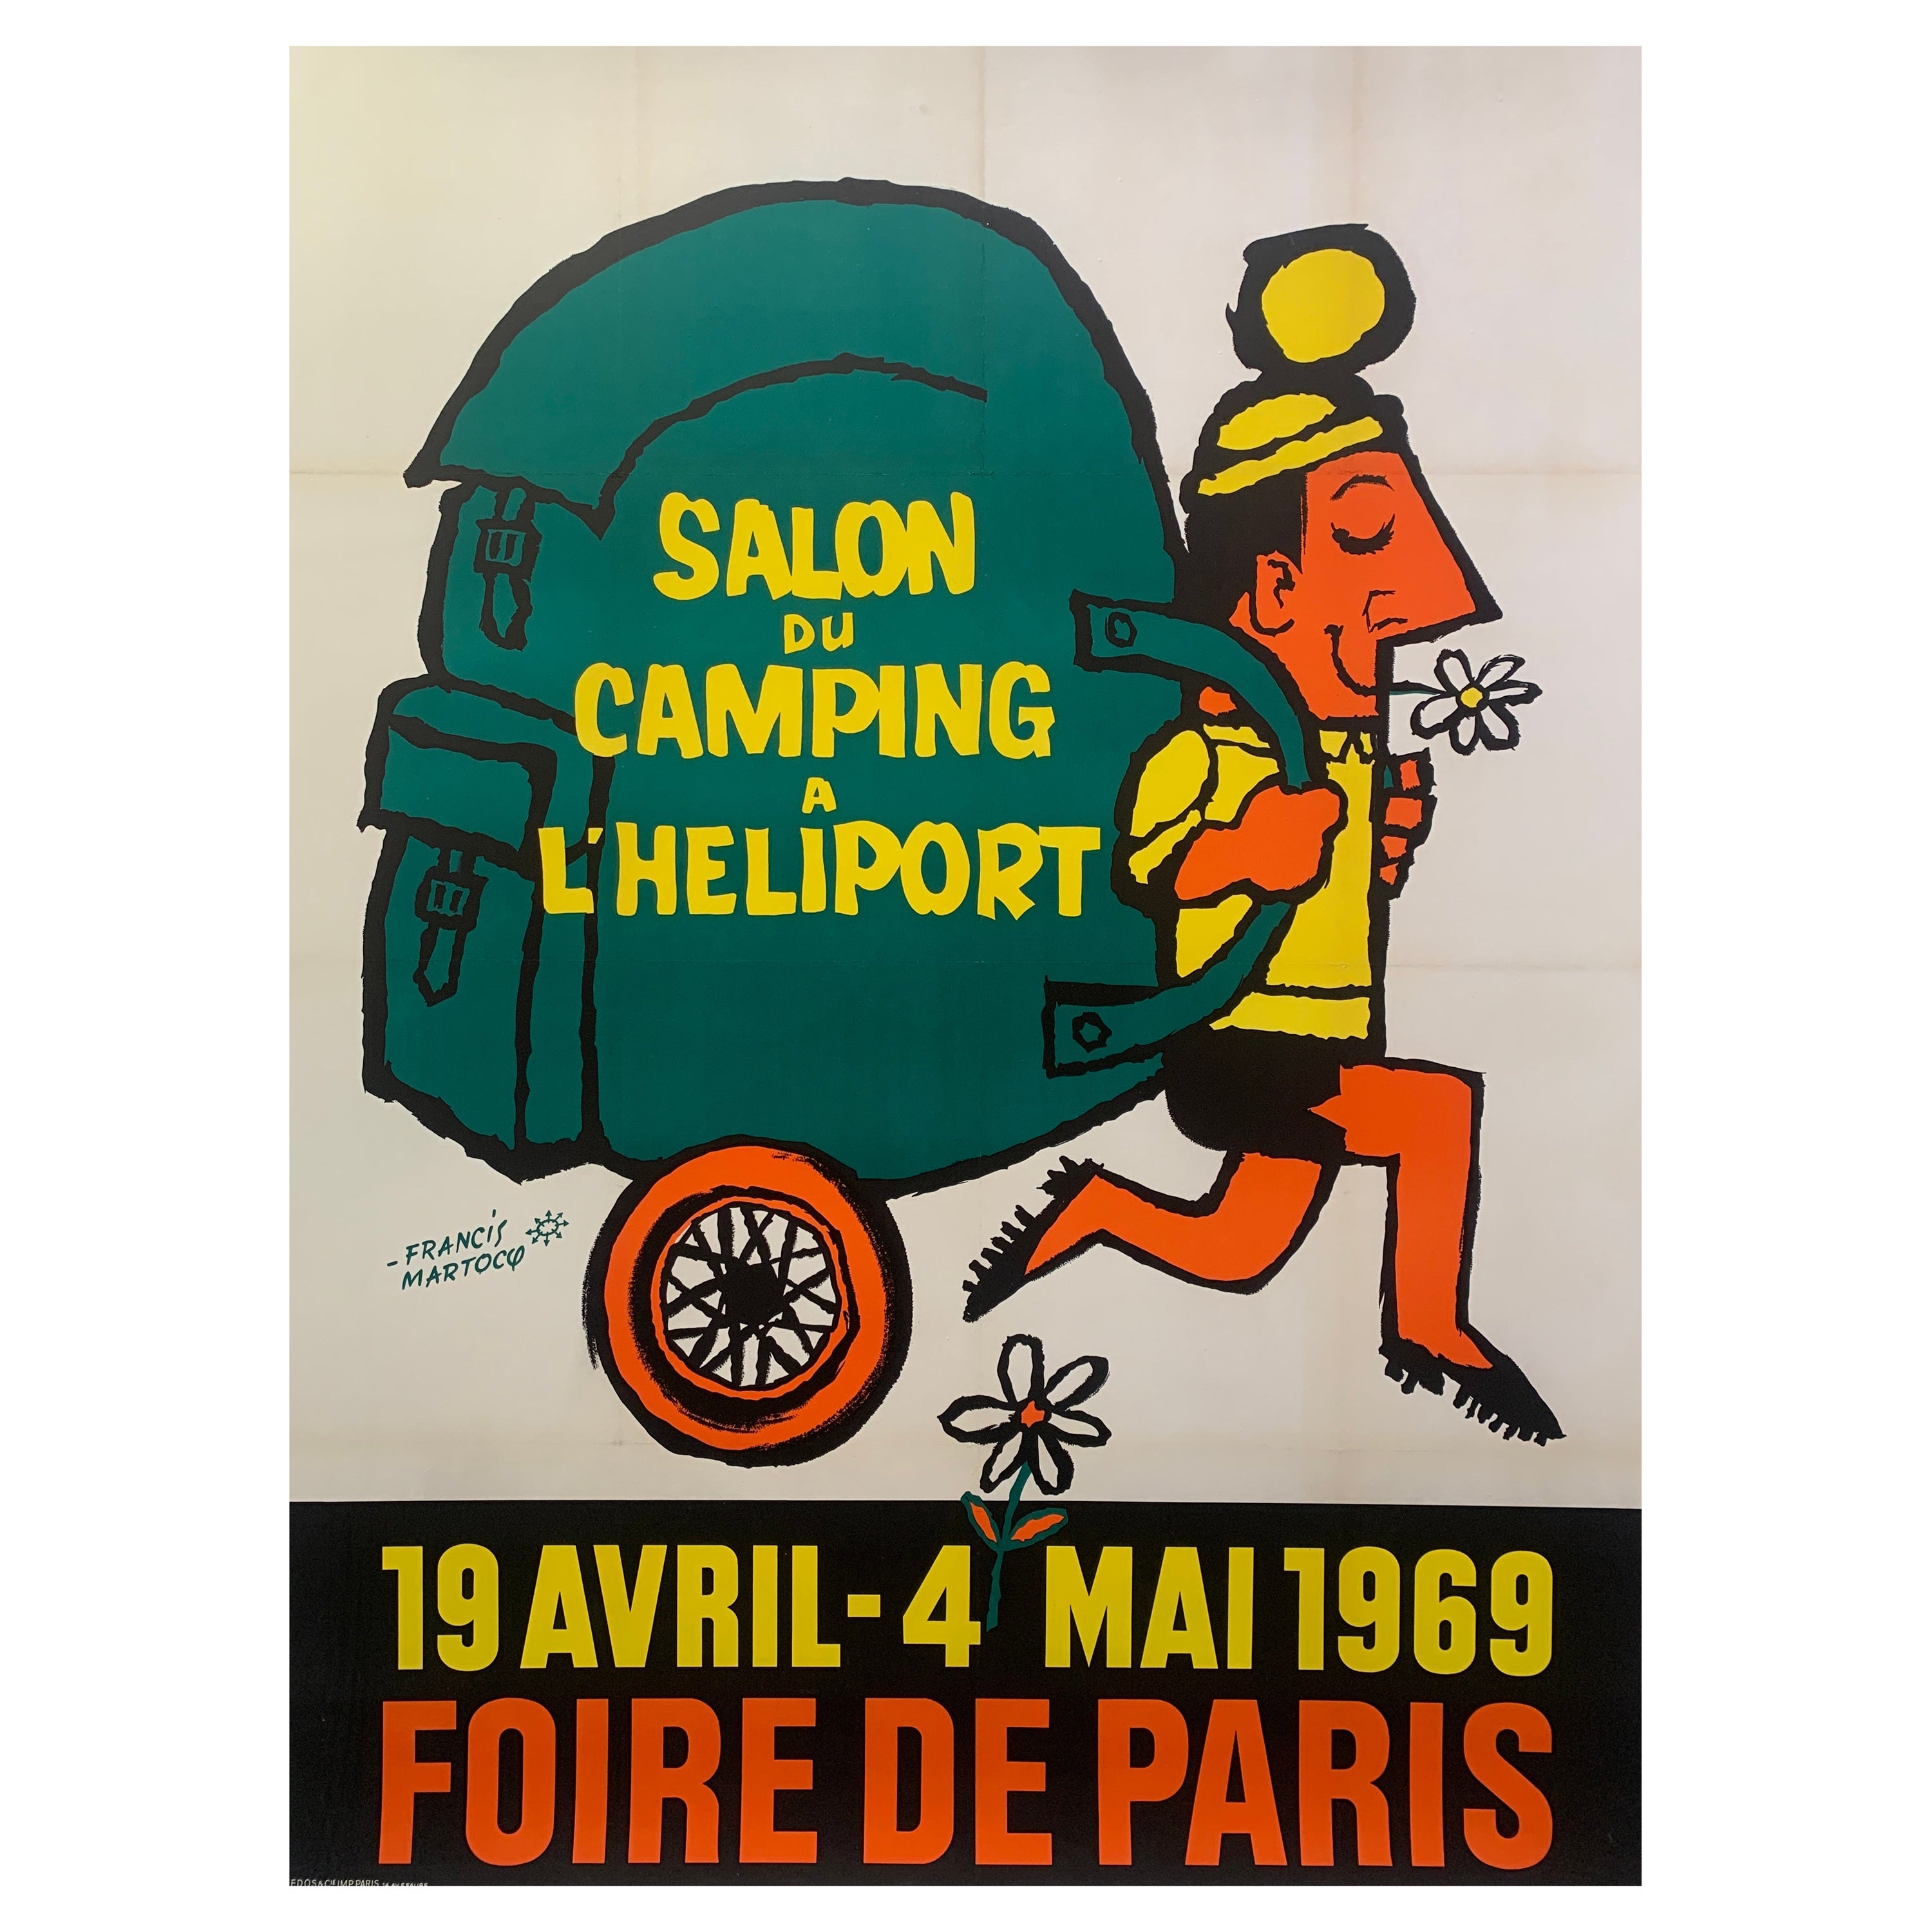 Original Vintage French Camping Poster, c. 1950 by Francis Martocq For Sale